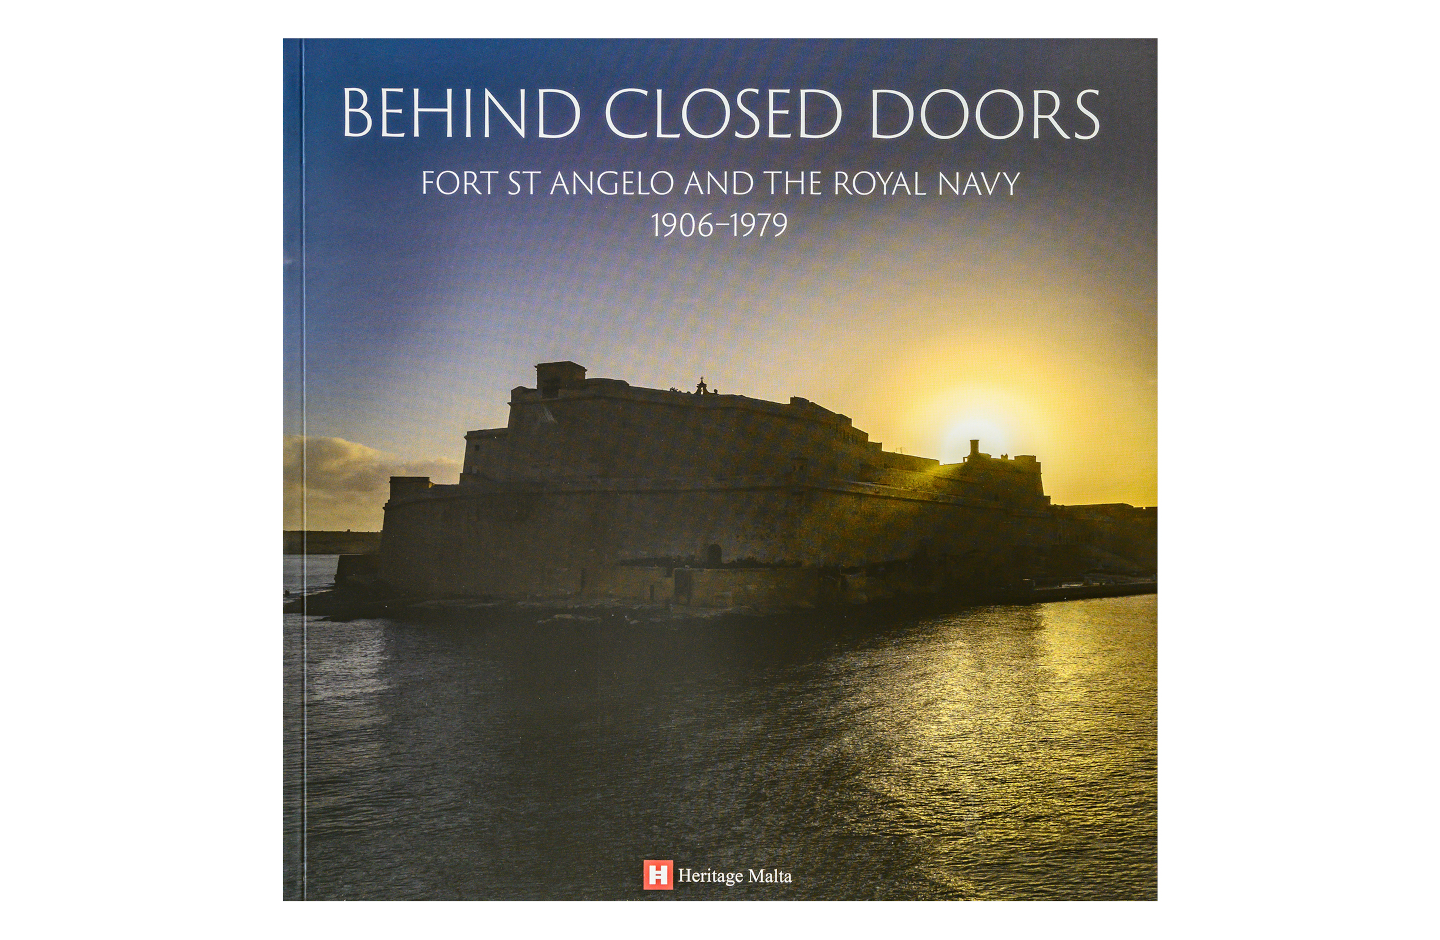 Behind Closed Doors – Fort St Angelo and the Royal Navy 1906-1979